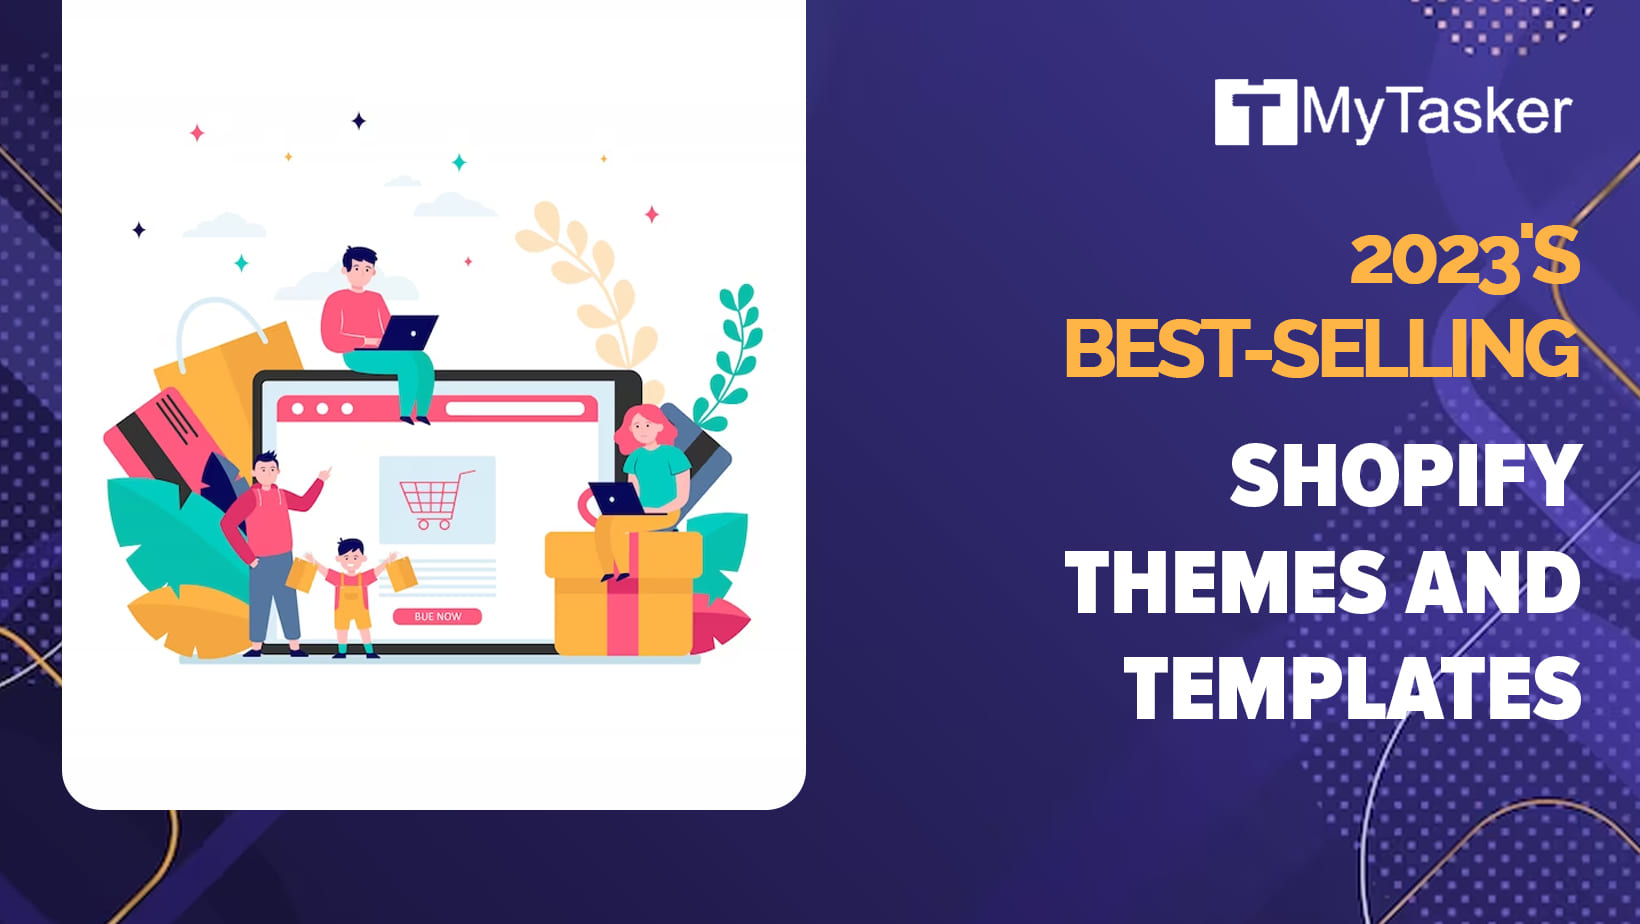 2023's Best-Selling Shopify Themes and Templates